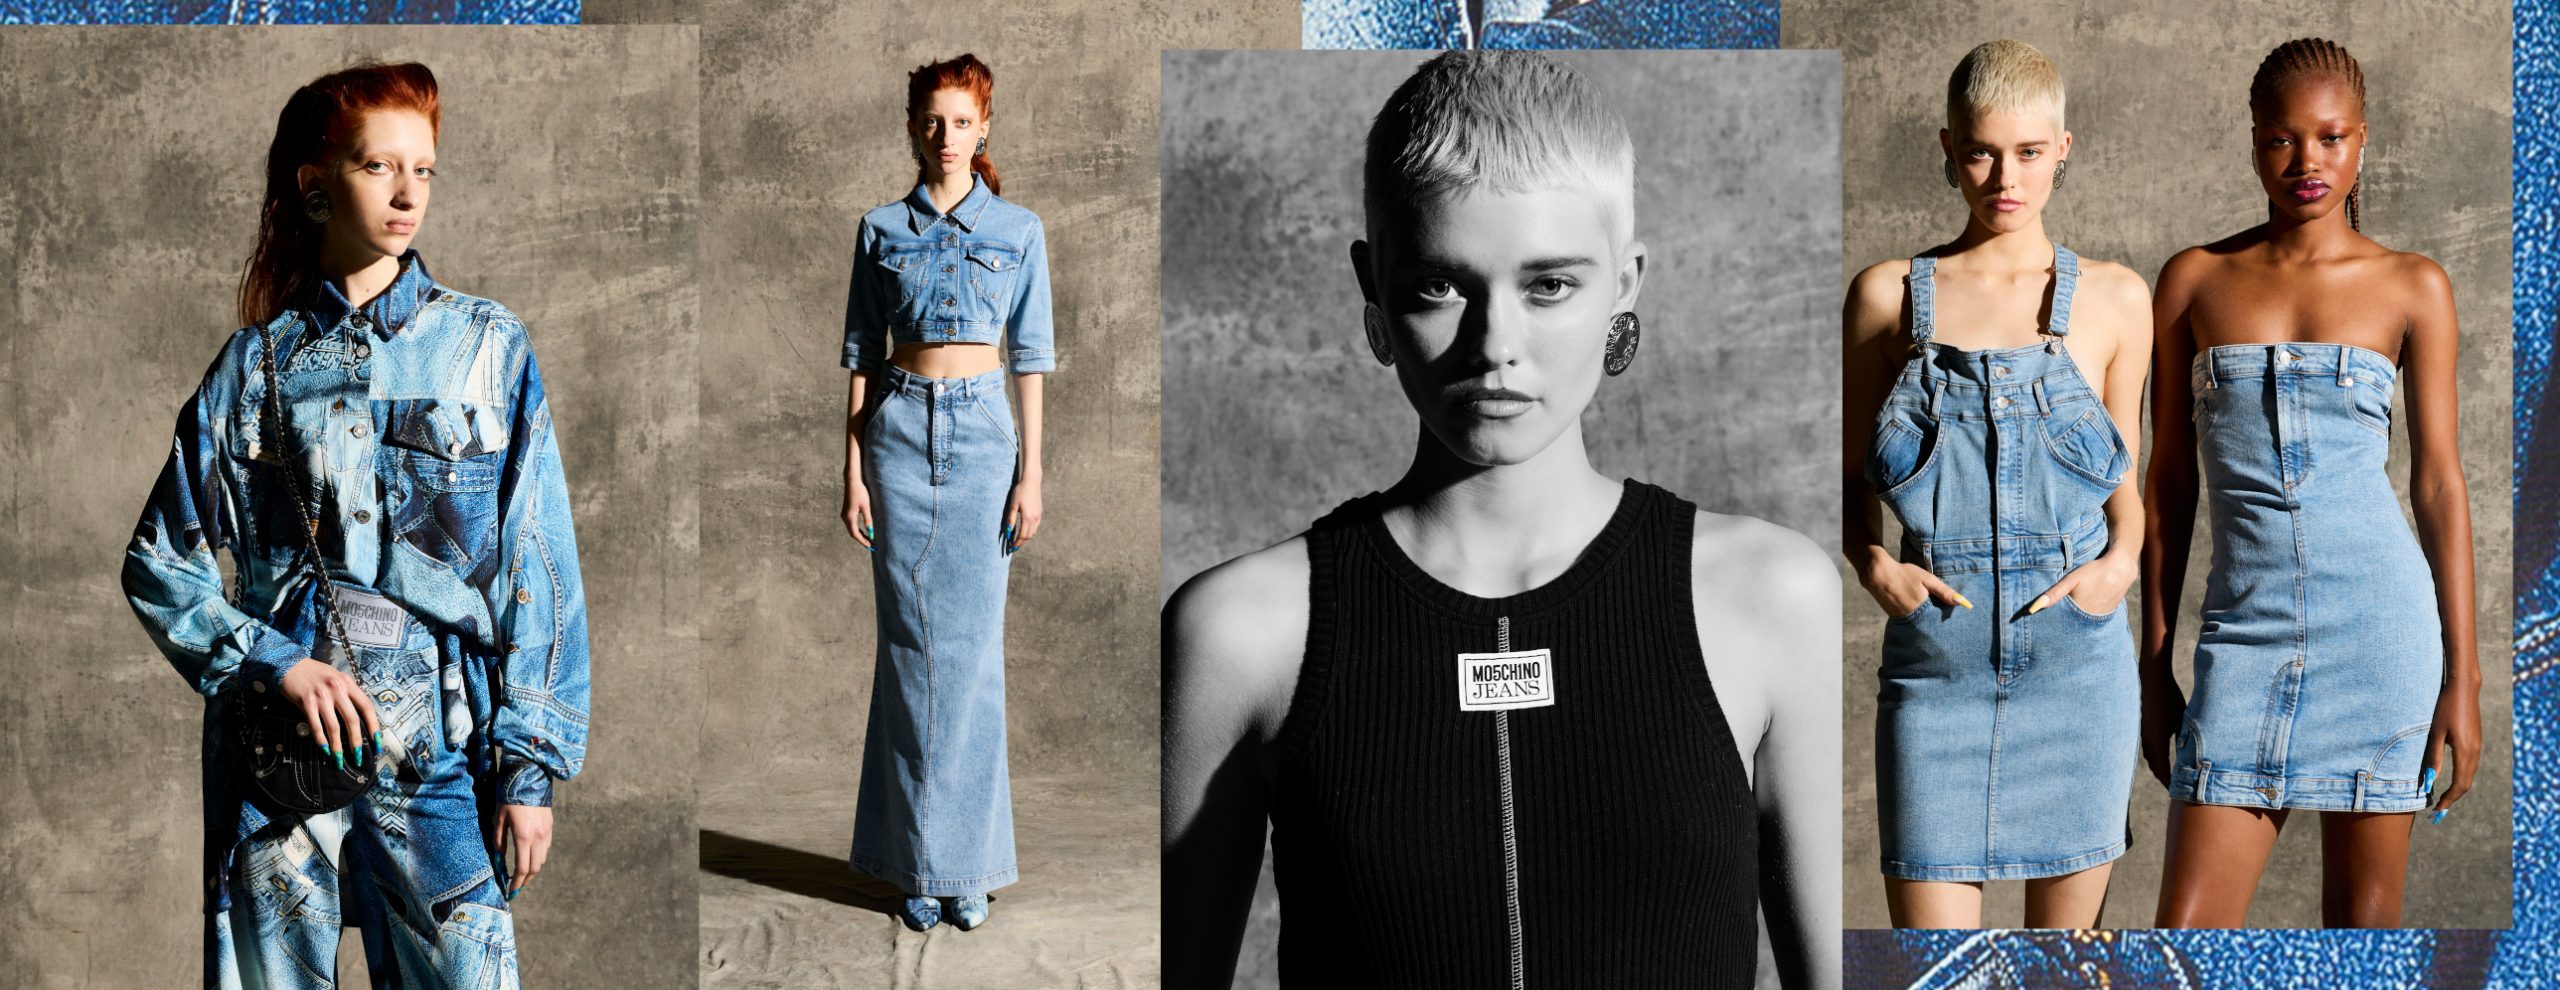 Denim Gets Creative With The Launch Of M05CH1N0 JEANS In Singapore